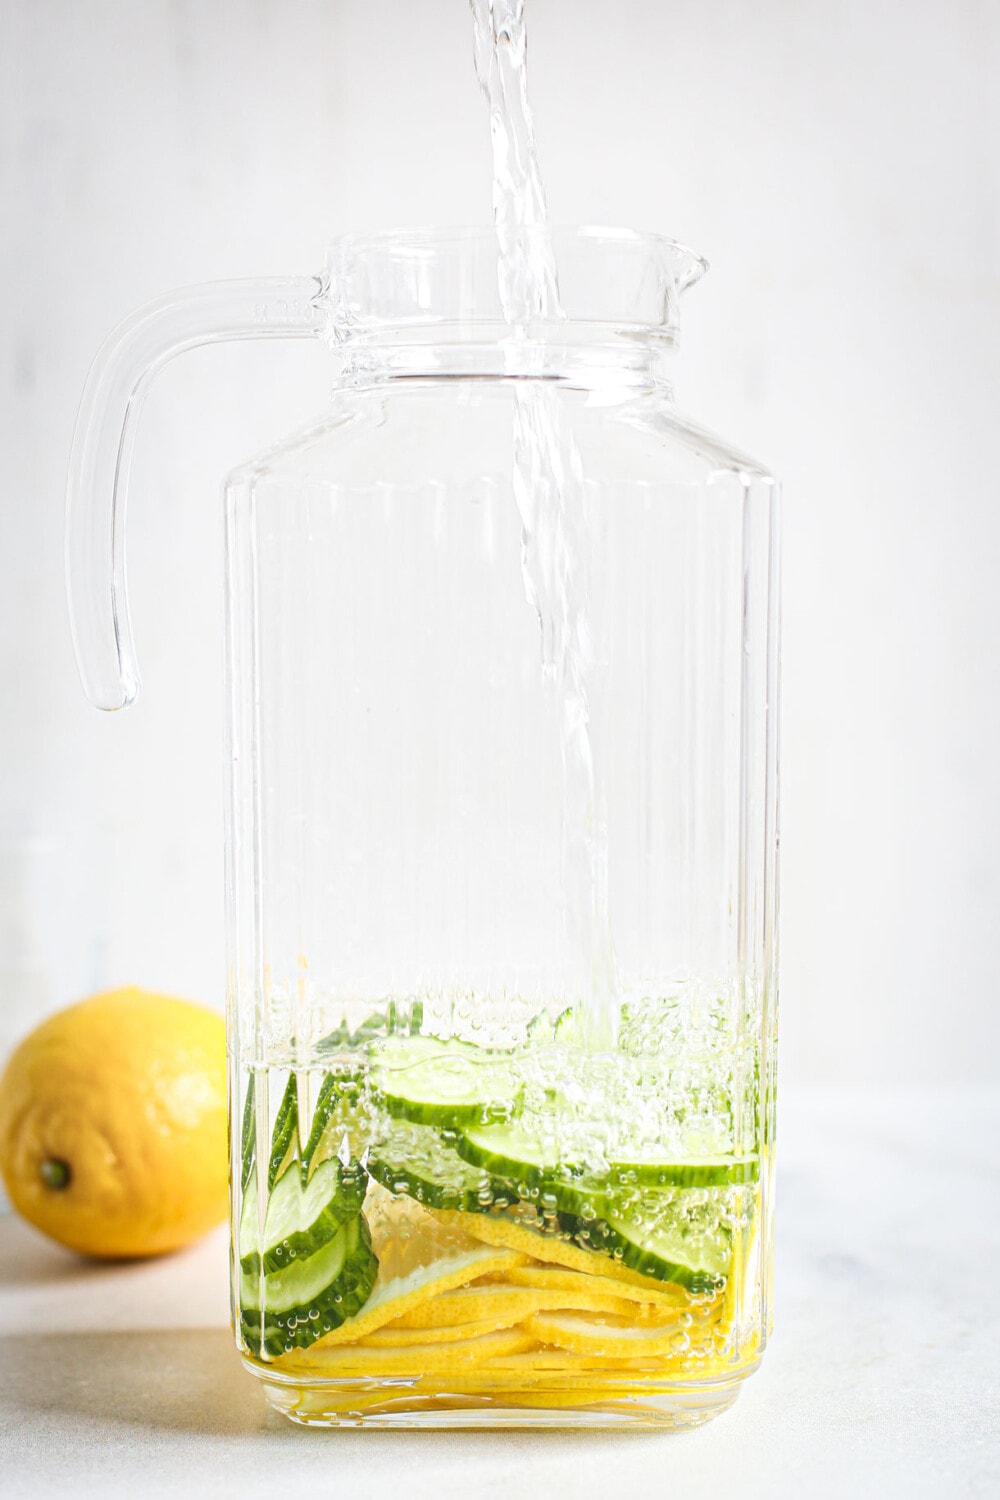 pouring water into glass pitcher filled with cucumbers and lemon slices